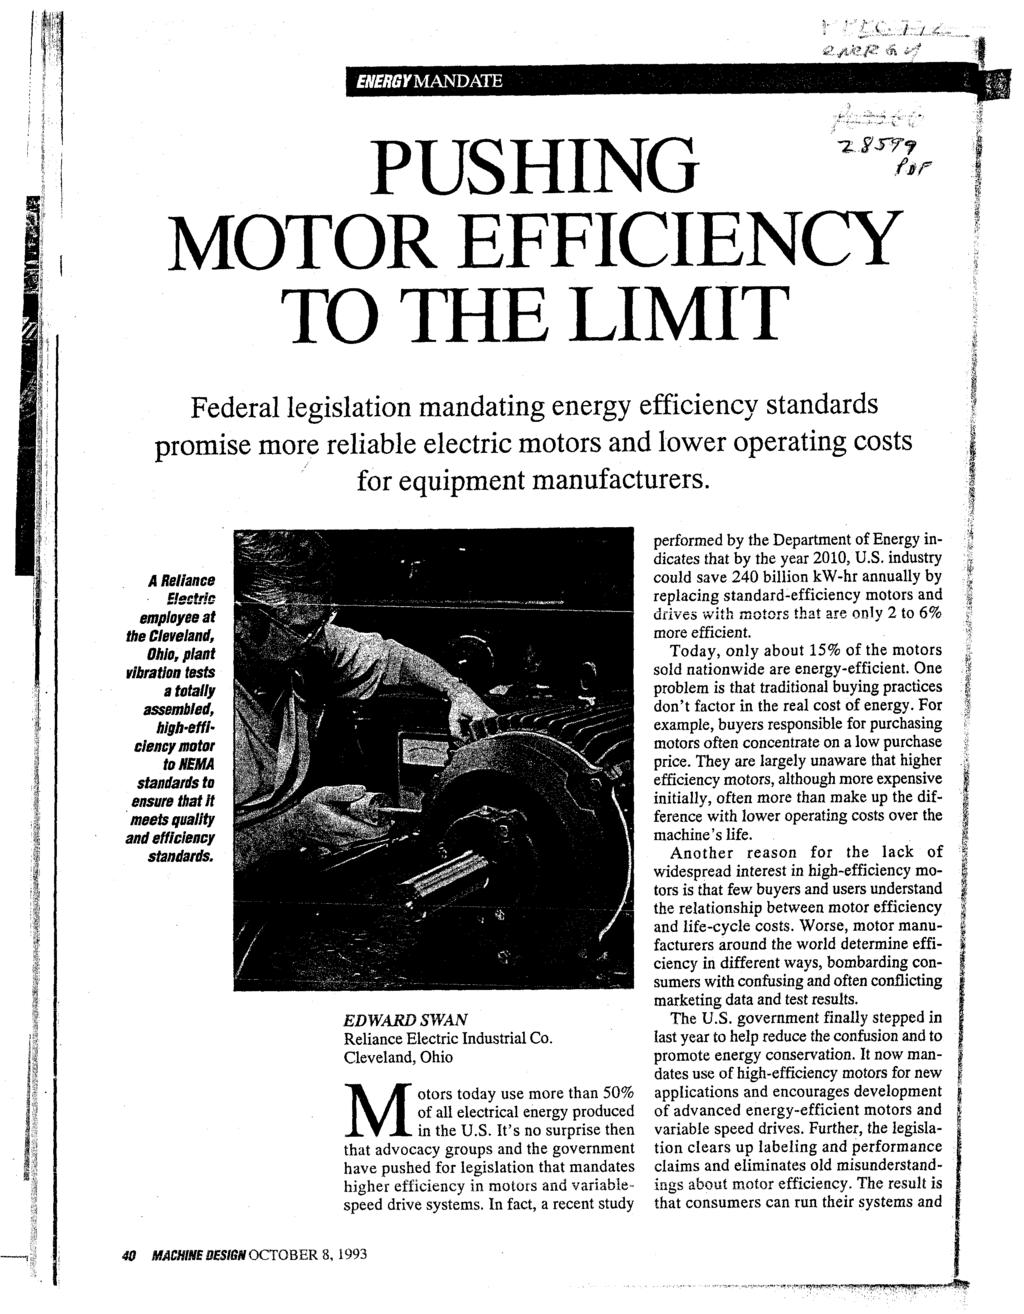 PUSHING MOTOR EFFICIENCY TO THE LIMIT Federal legislation mandating energy efficiency standards promise more reliable electric motors and lower operating costs for equipment manufacturers A Reliance